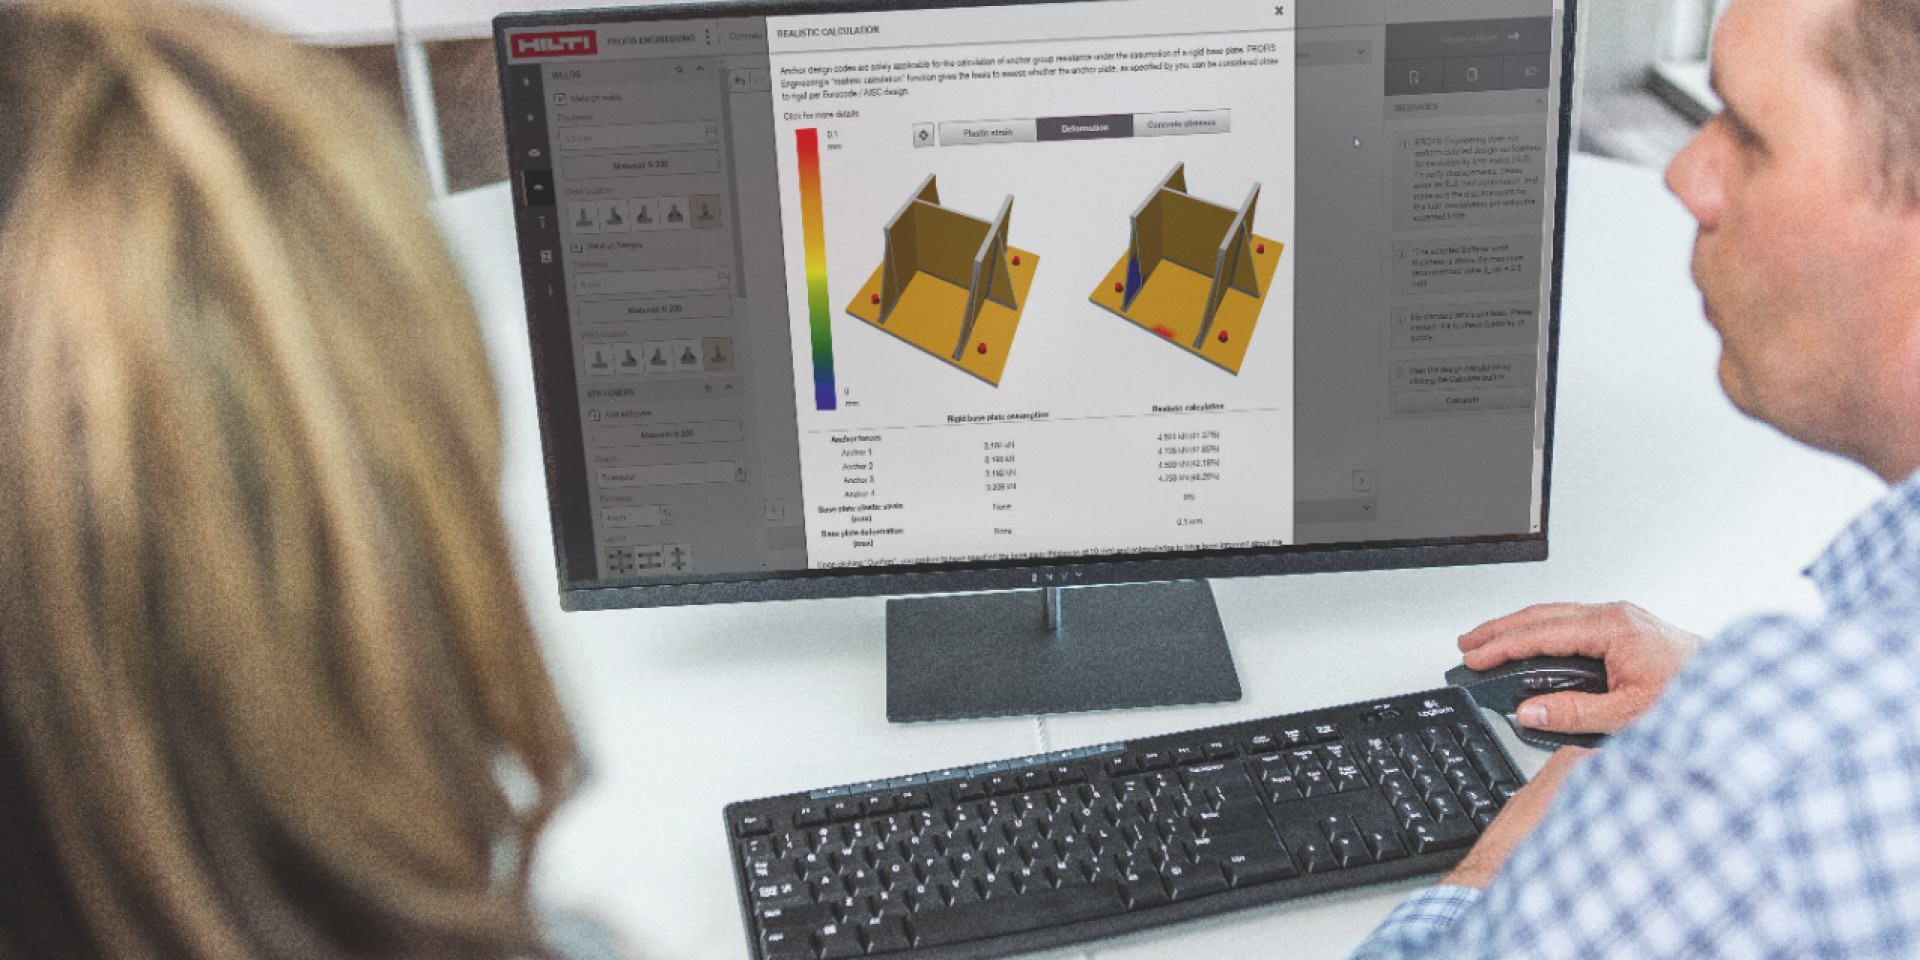 2 people working with Hilti design software infront of a screen